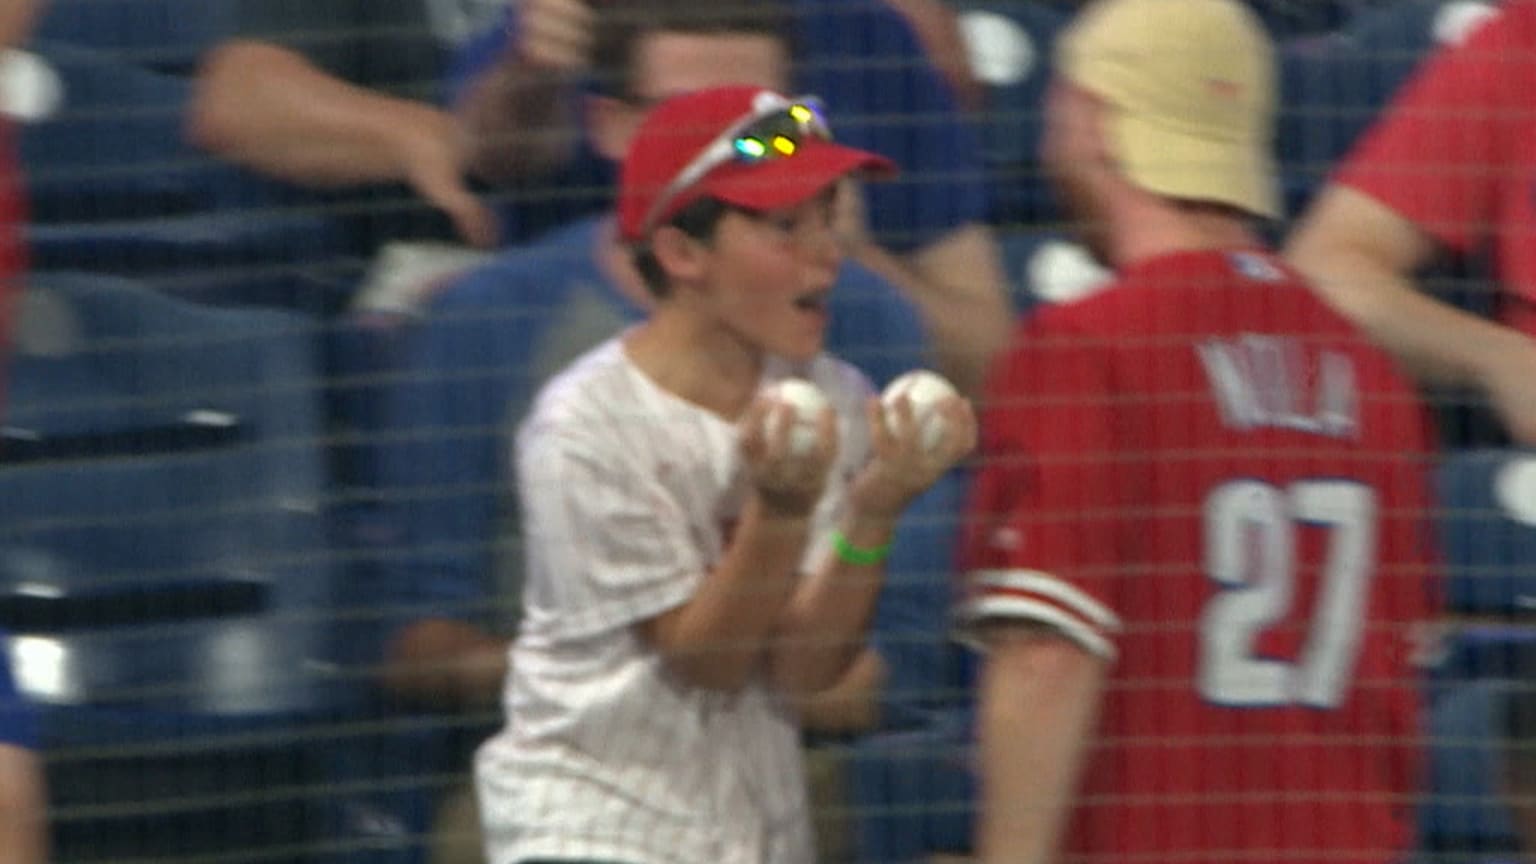 Young Phillies Fan Goes Viral After Giving Foul Ball To Crying Girl 